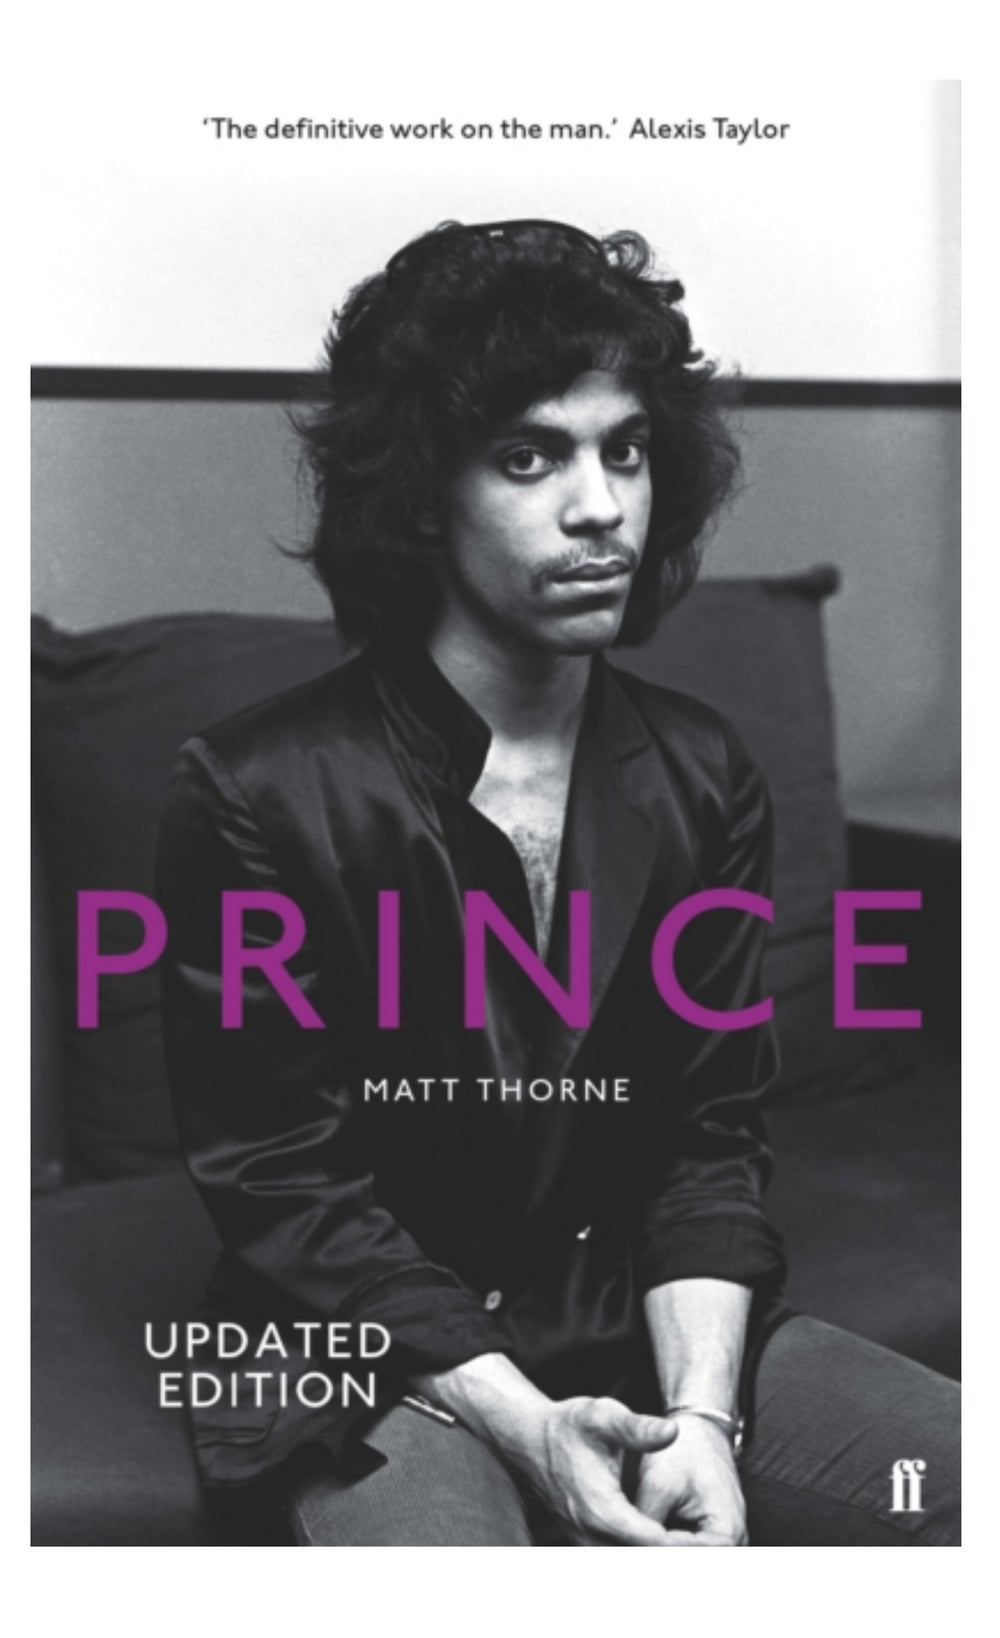 Prince – By Matt Thorne Paperback Softback Book 608 Pages UPDATED:NEW